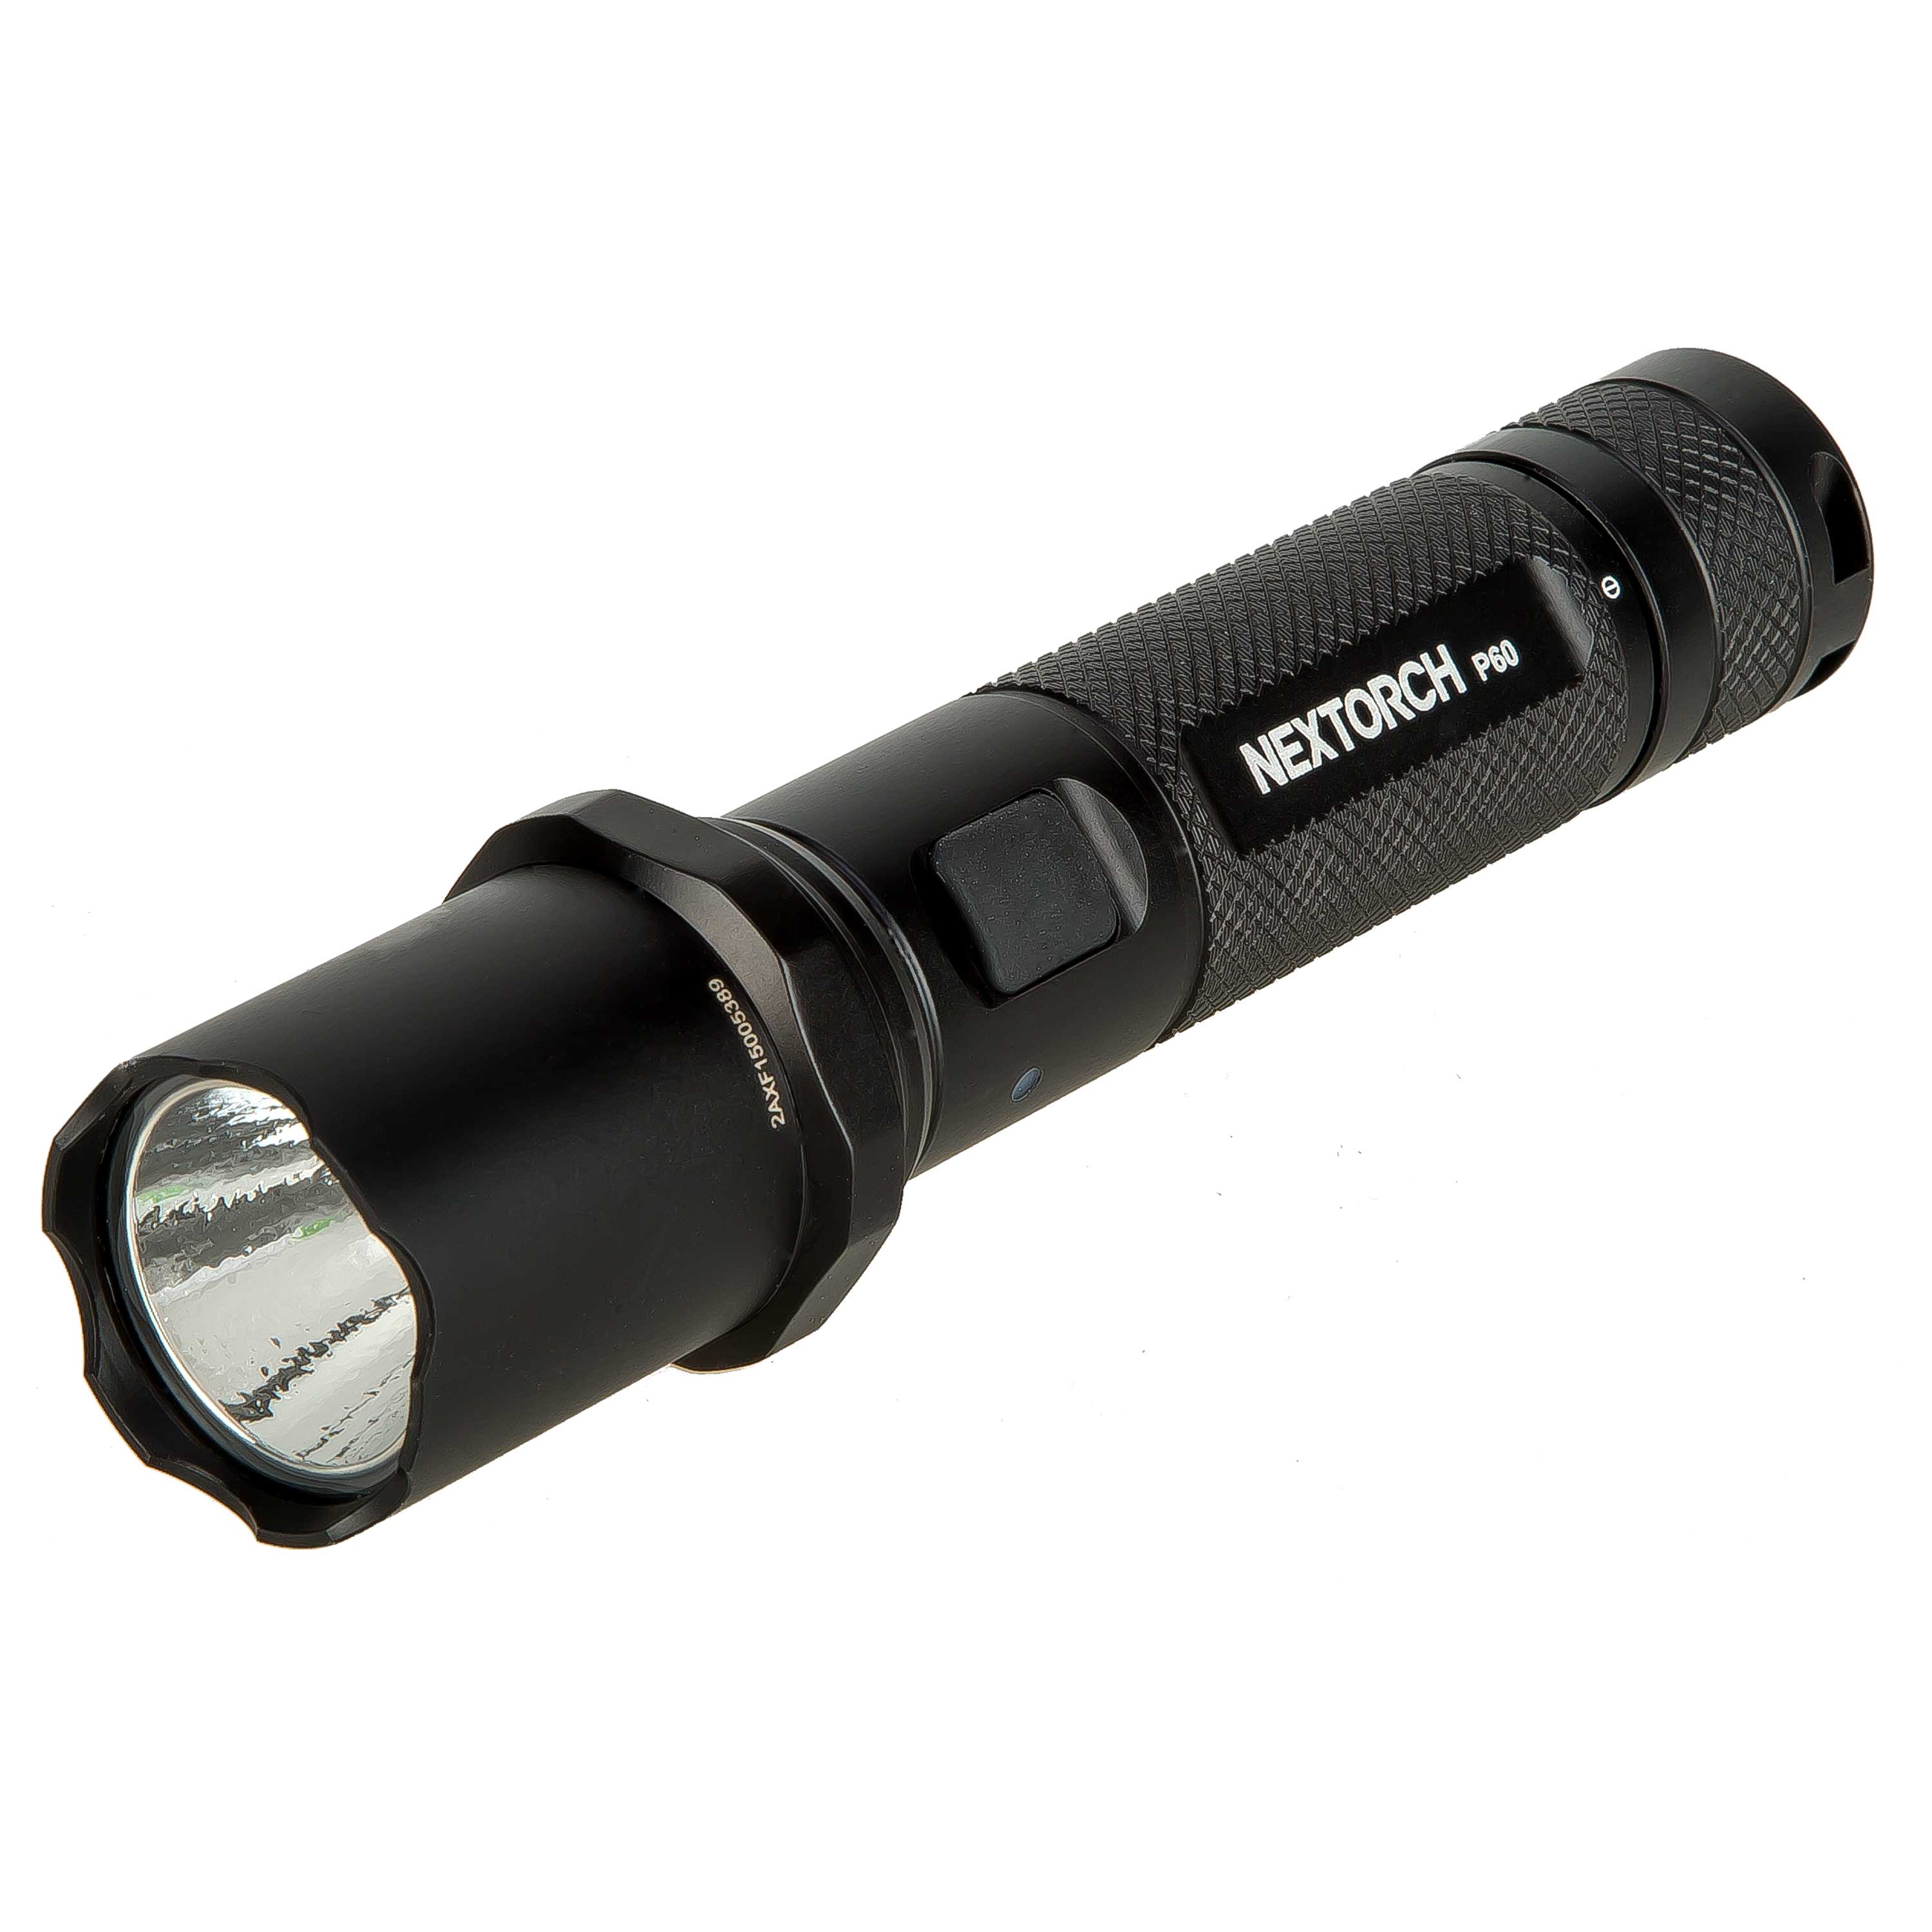 Nextorch P60 Tactical Military Hiking Rechargeable LED Torch Flashlight Light 